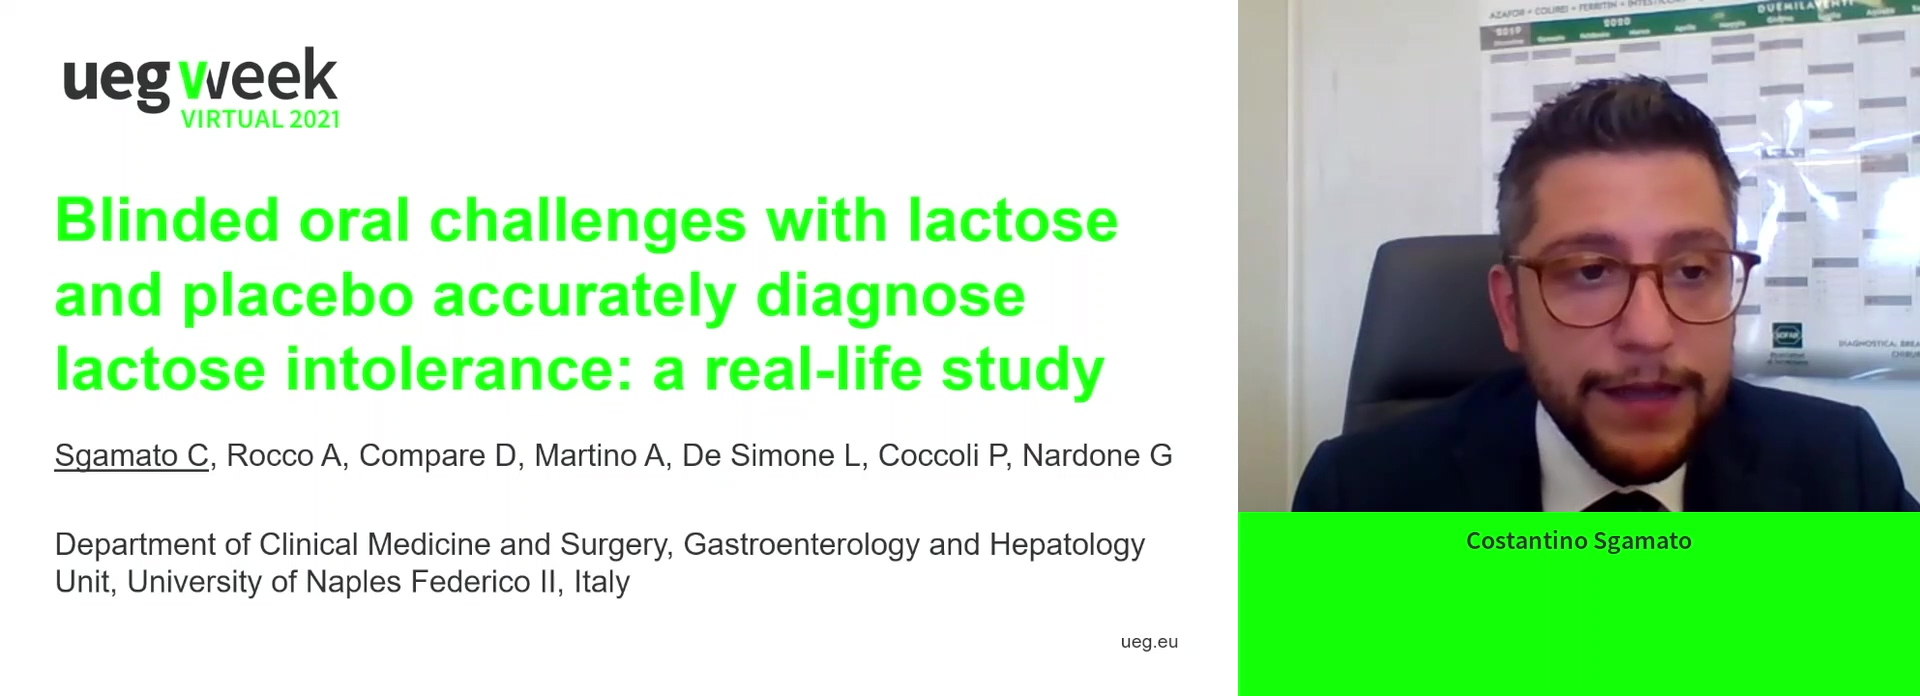 BLINDED ORAL CHALLENGES WITH LACTOSE AND PLACEBO ACCURATELY DIAGNOSE LACTOSE INTOLERANCE: A REAL-LIFE STUDY